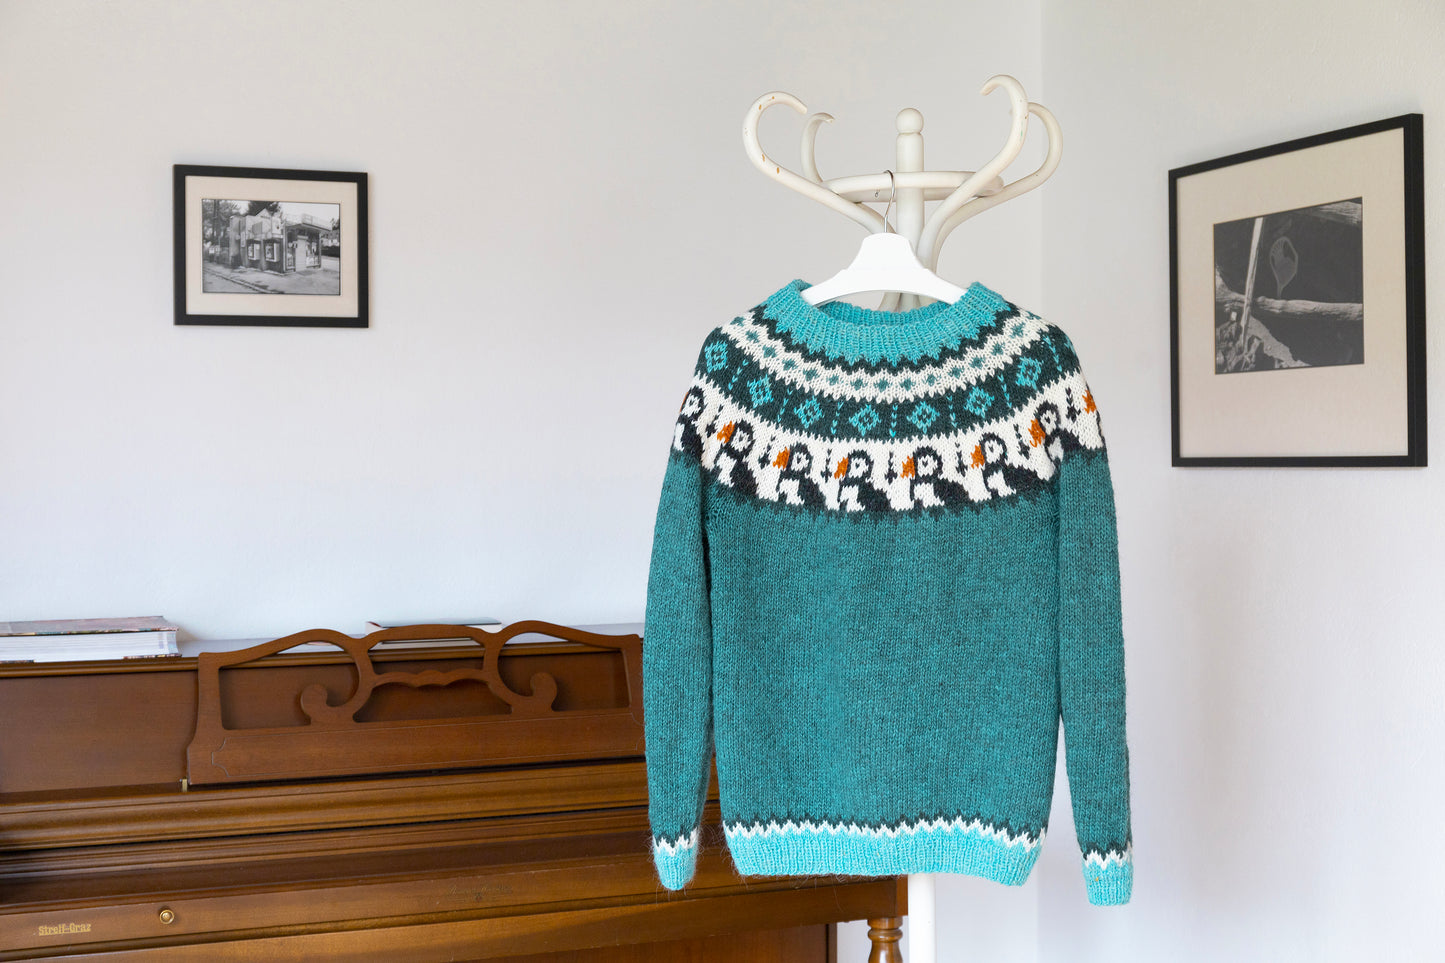 Turquoise, white and black pure Icelandic wool hand-knitted lopapeysa sweater in Puffins knitting pattern in interior